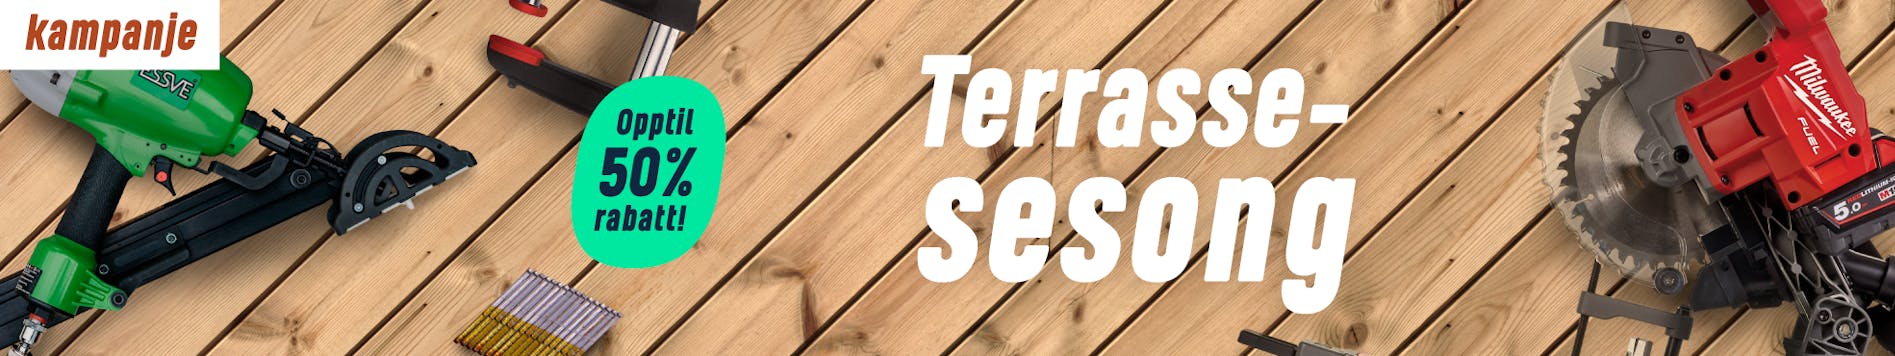 https://www.staypro.no/terrassesesong